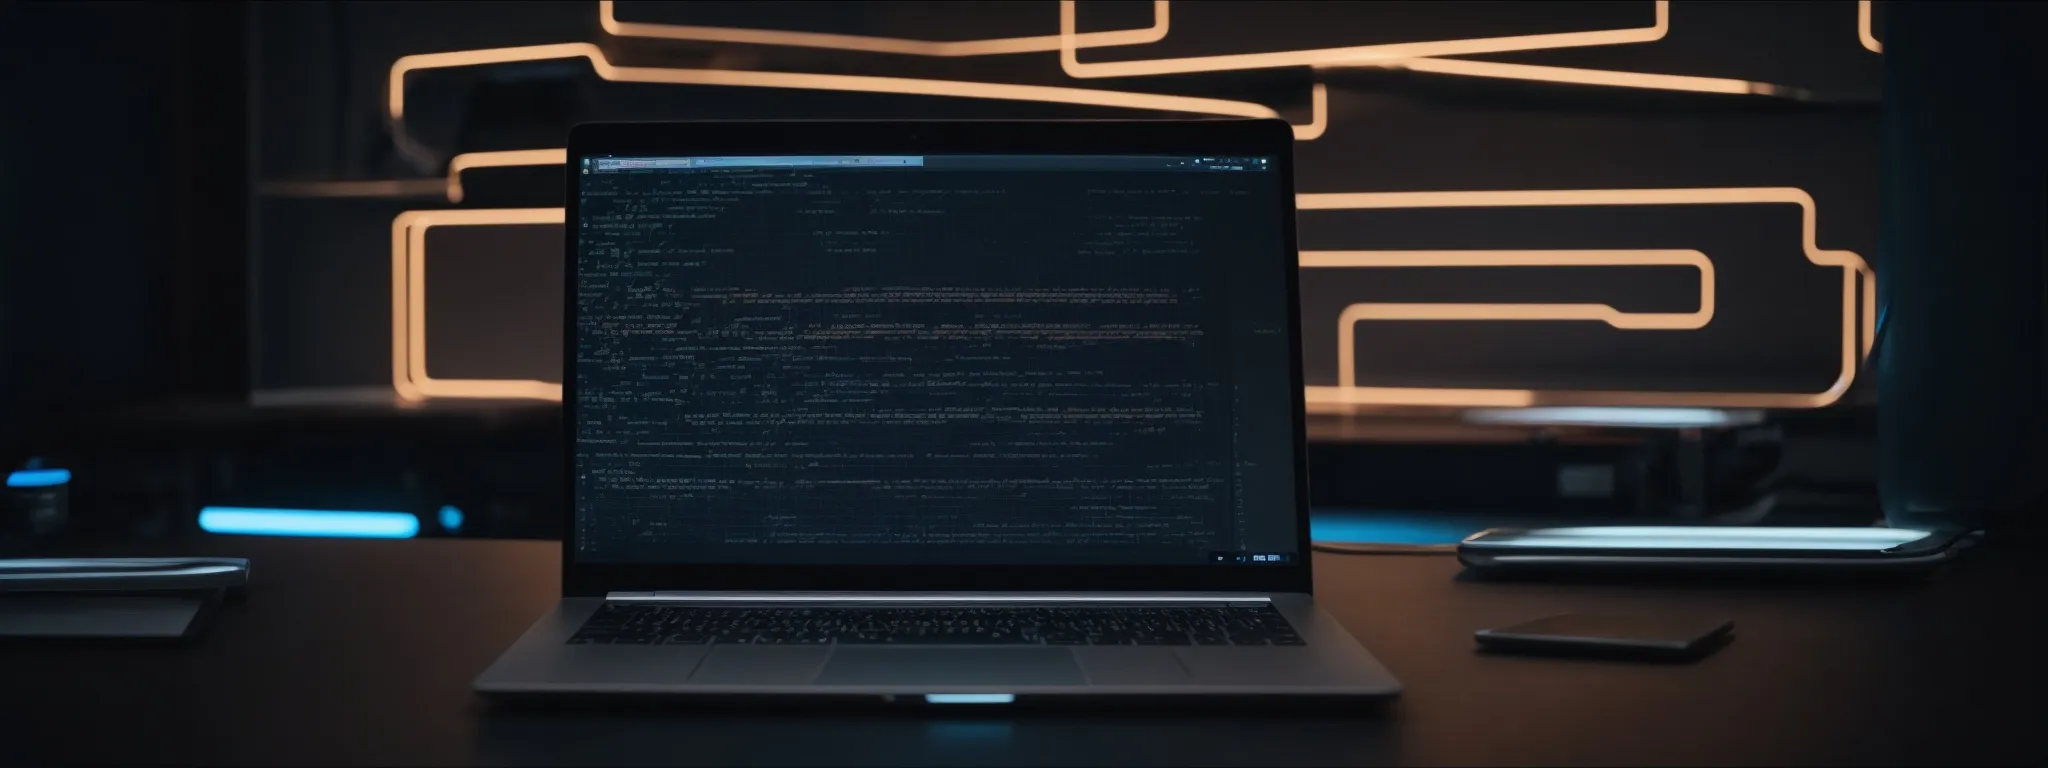 a wide-open laptop with glowing lines of code on its screen, standing on a sleek, futuristic desk.